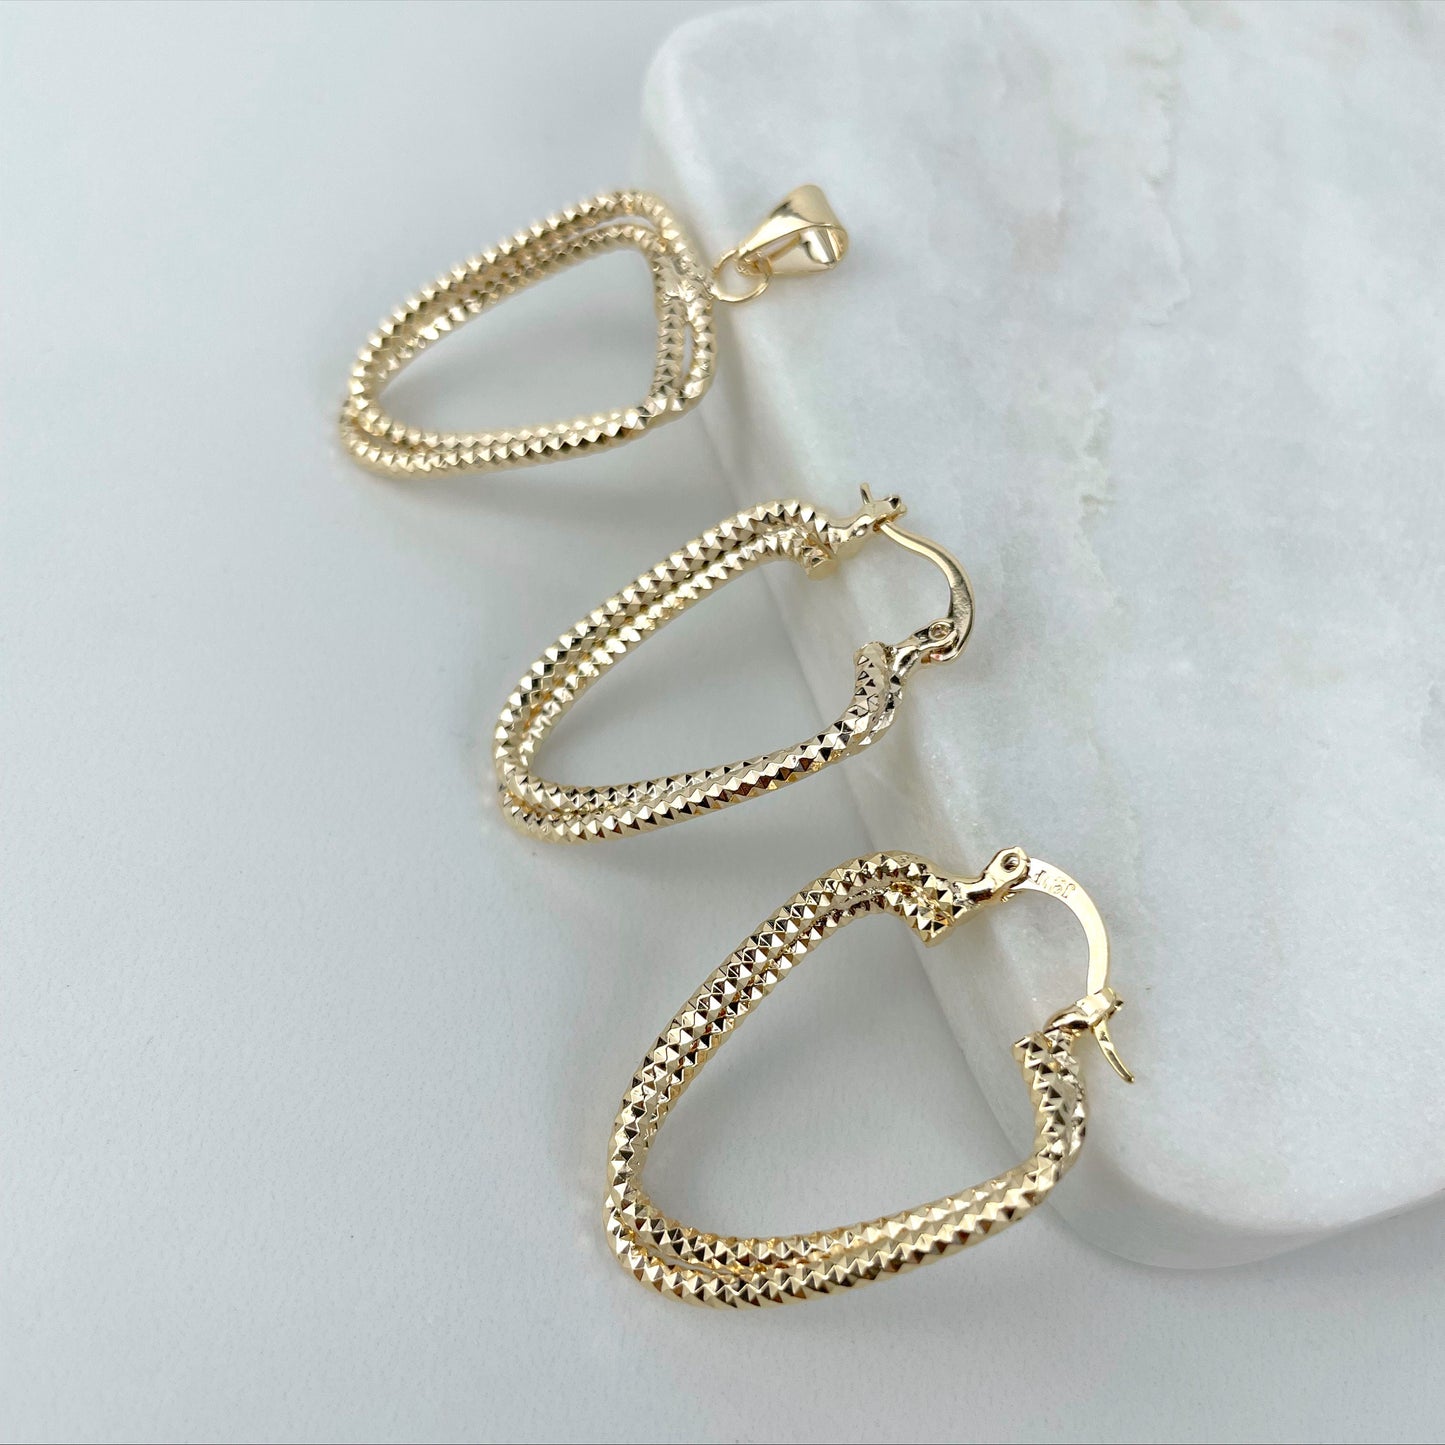 18k Gold Filled, Spiral Twisted Earrings, Pendant or Chain Wholesale Jewelry Supplies